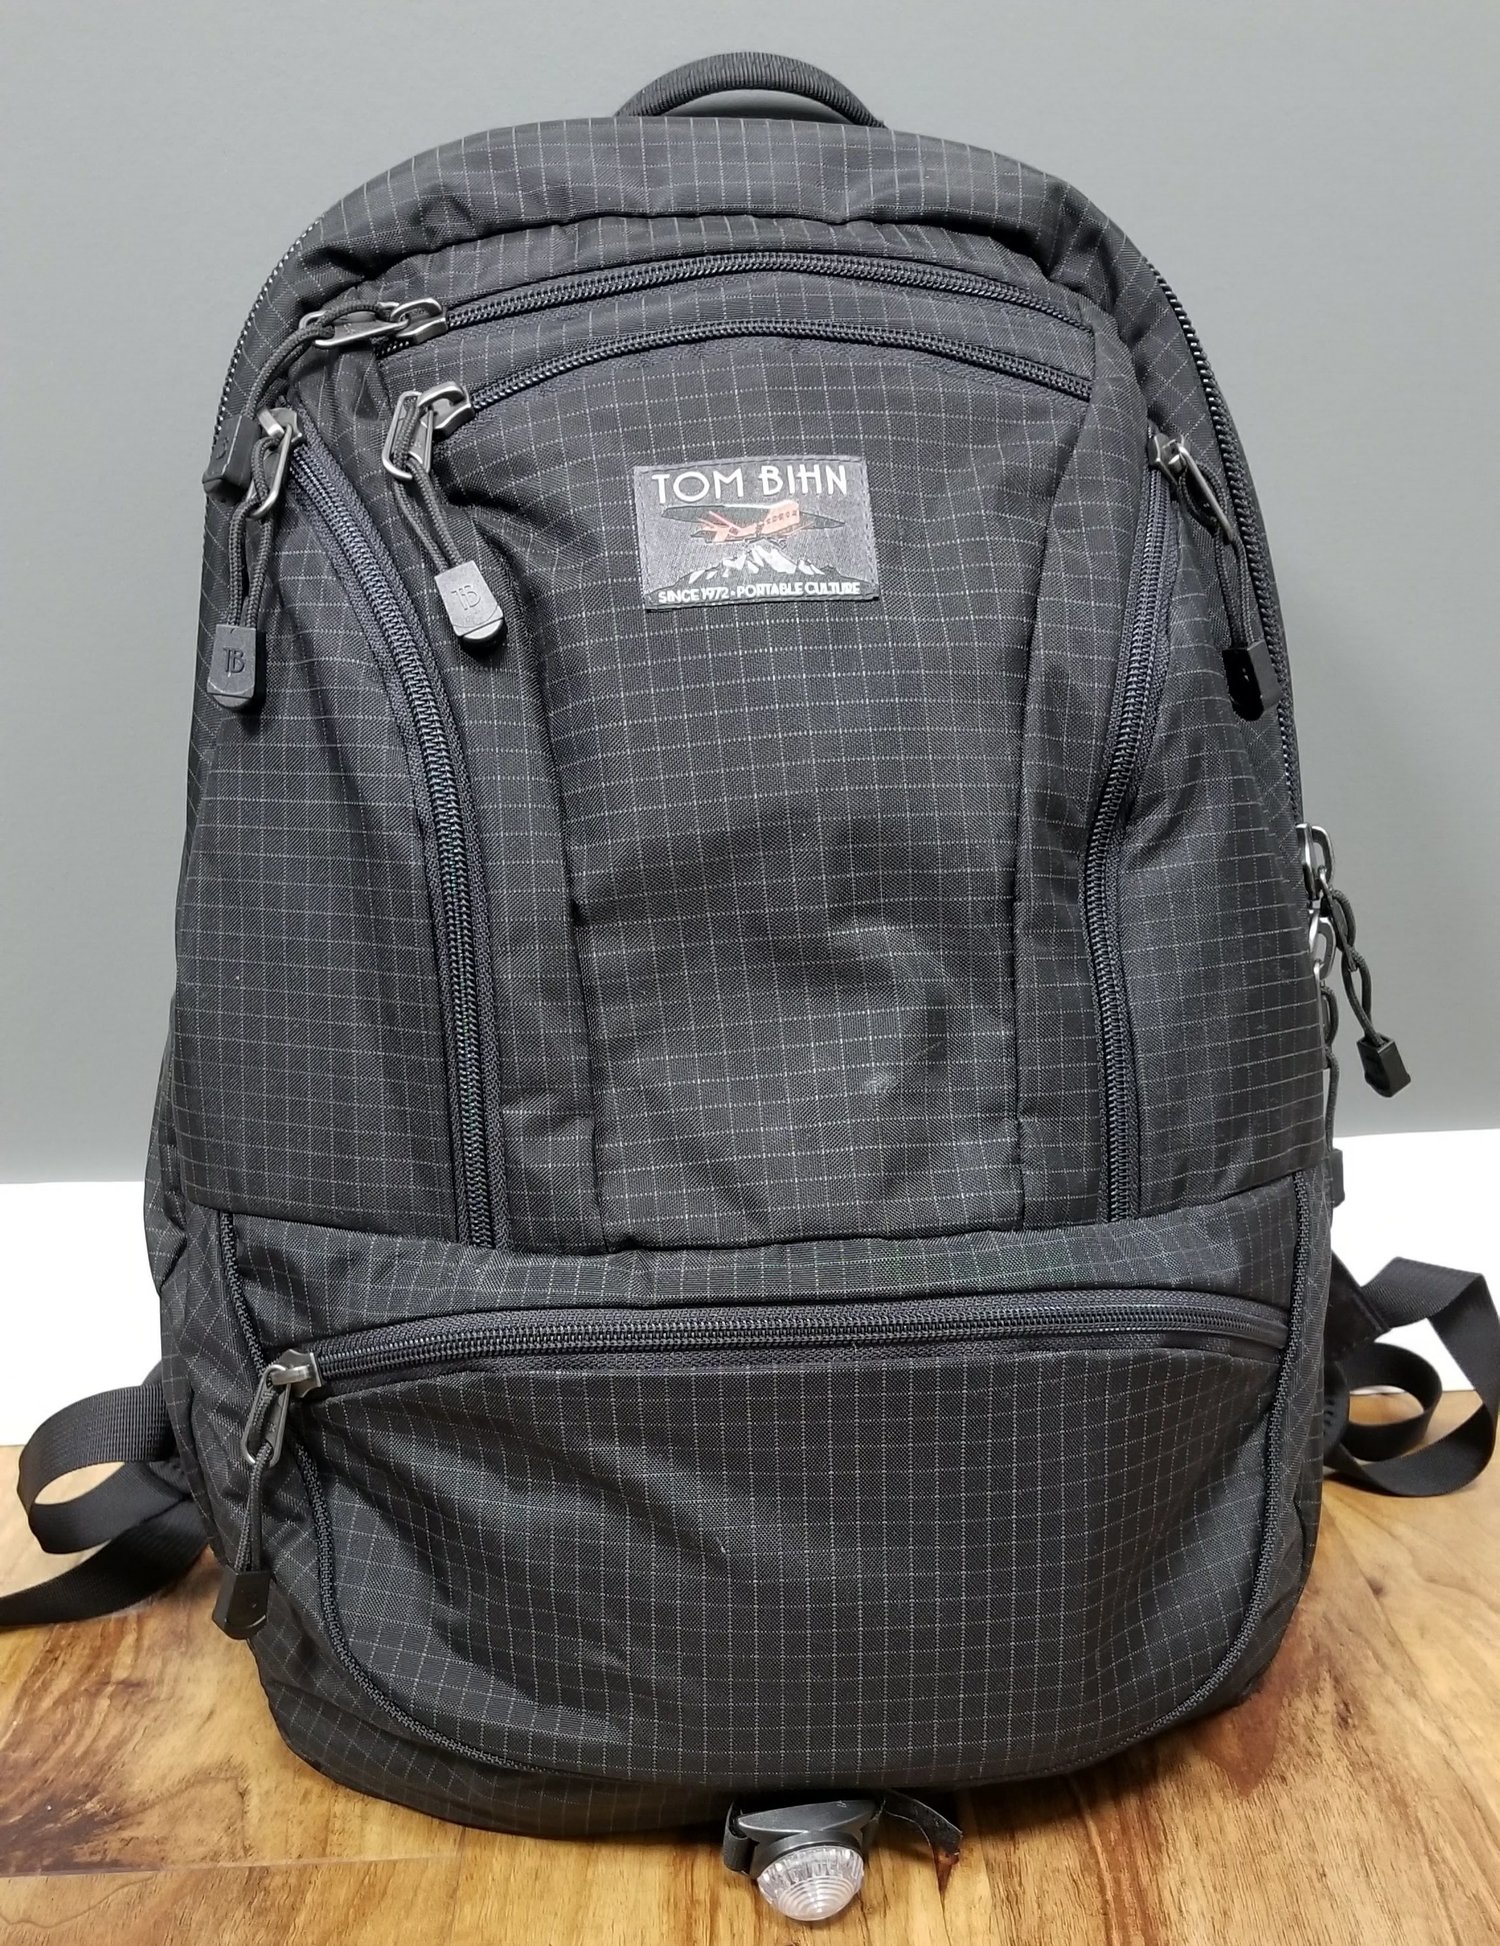 Review of the Tom Bihn Synapse 25 EDC backpack — Insights For Success